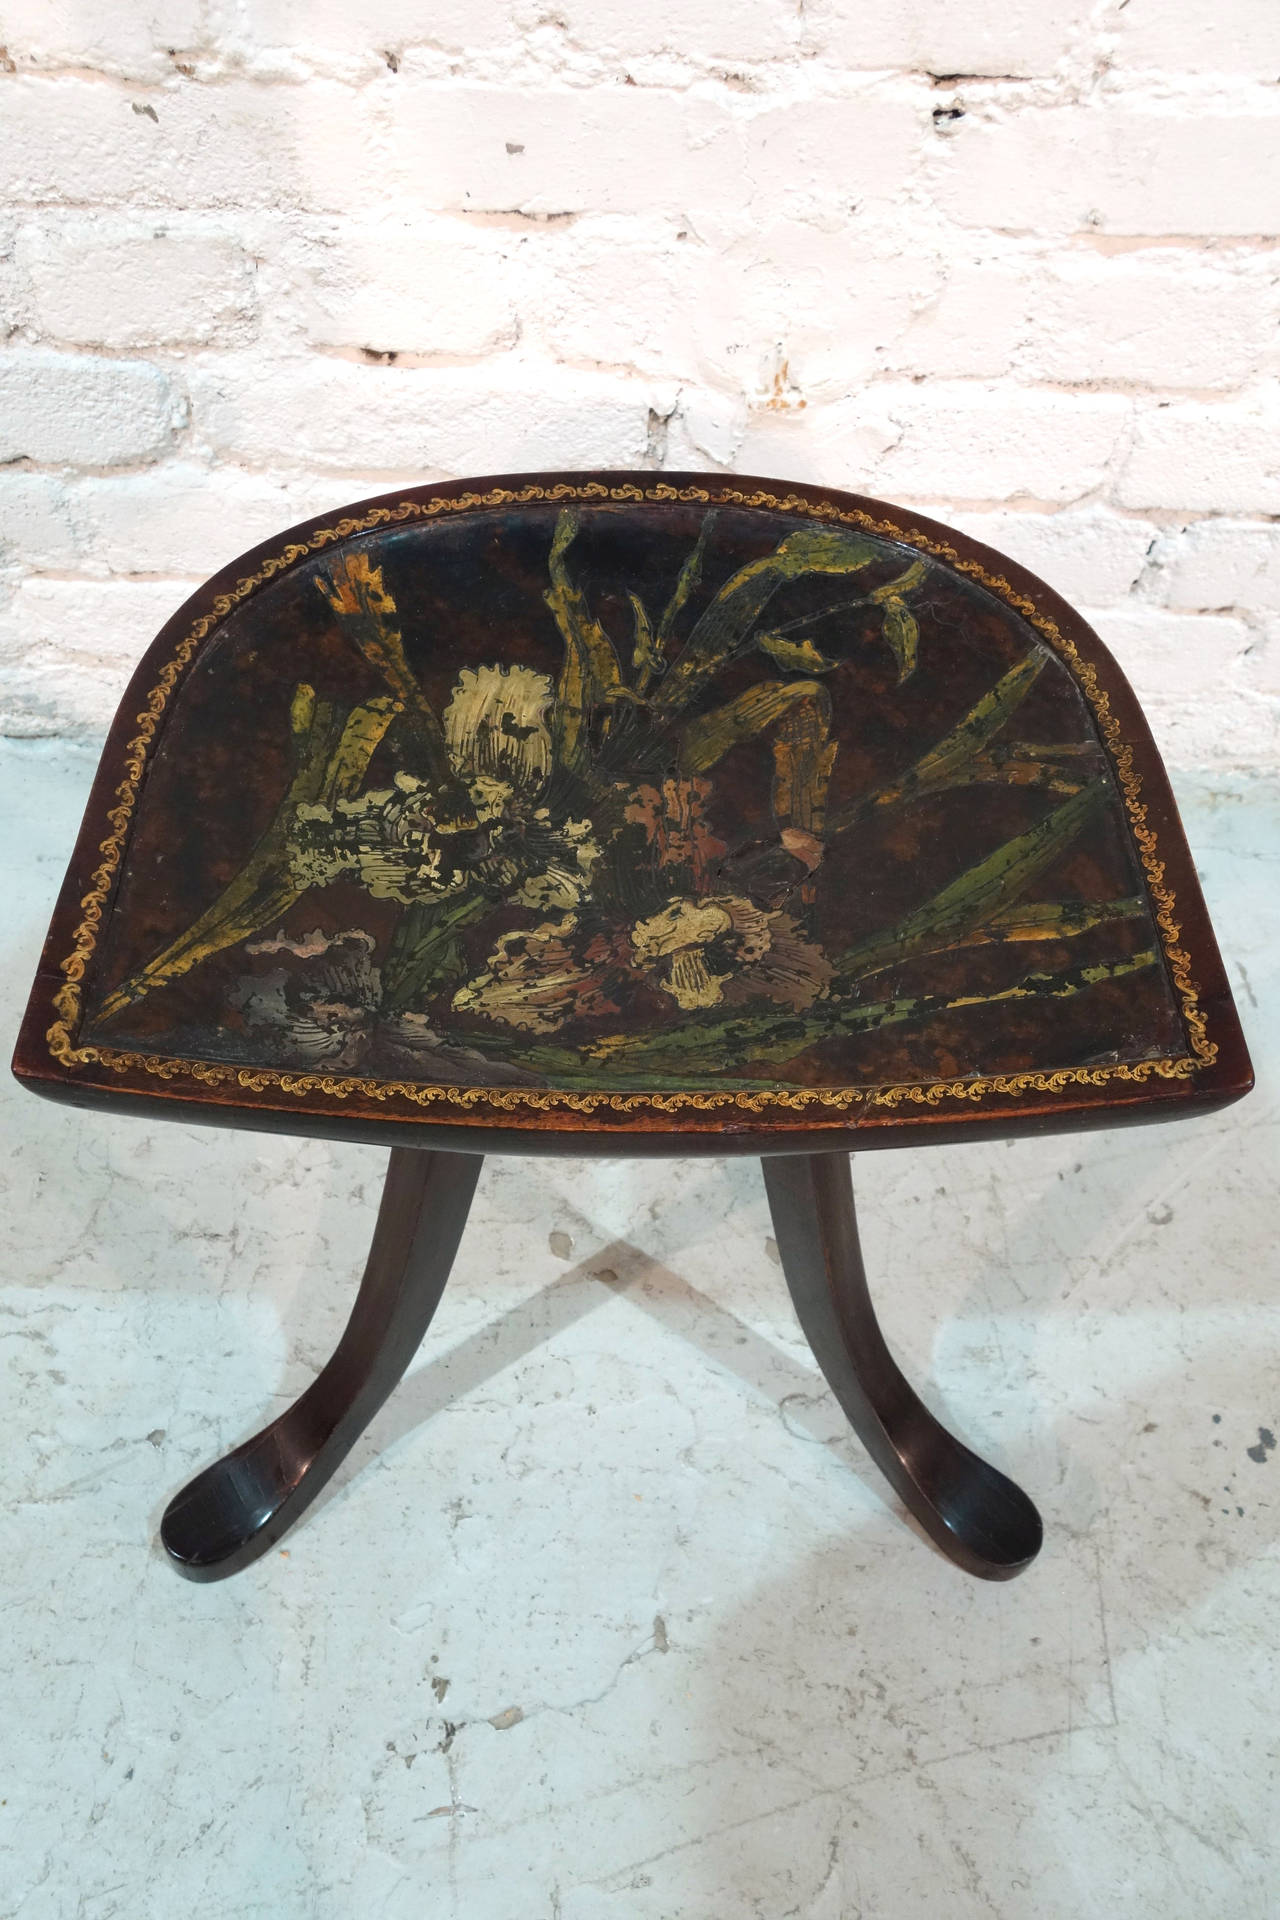 20th Century Thebes Stool Attributed to Leonard F. Wyburd for Liberty & Co